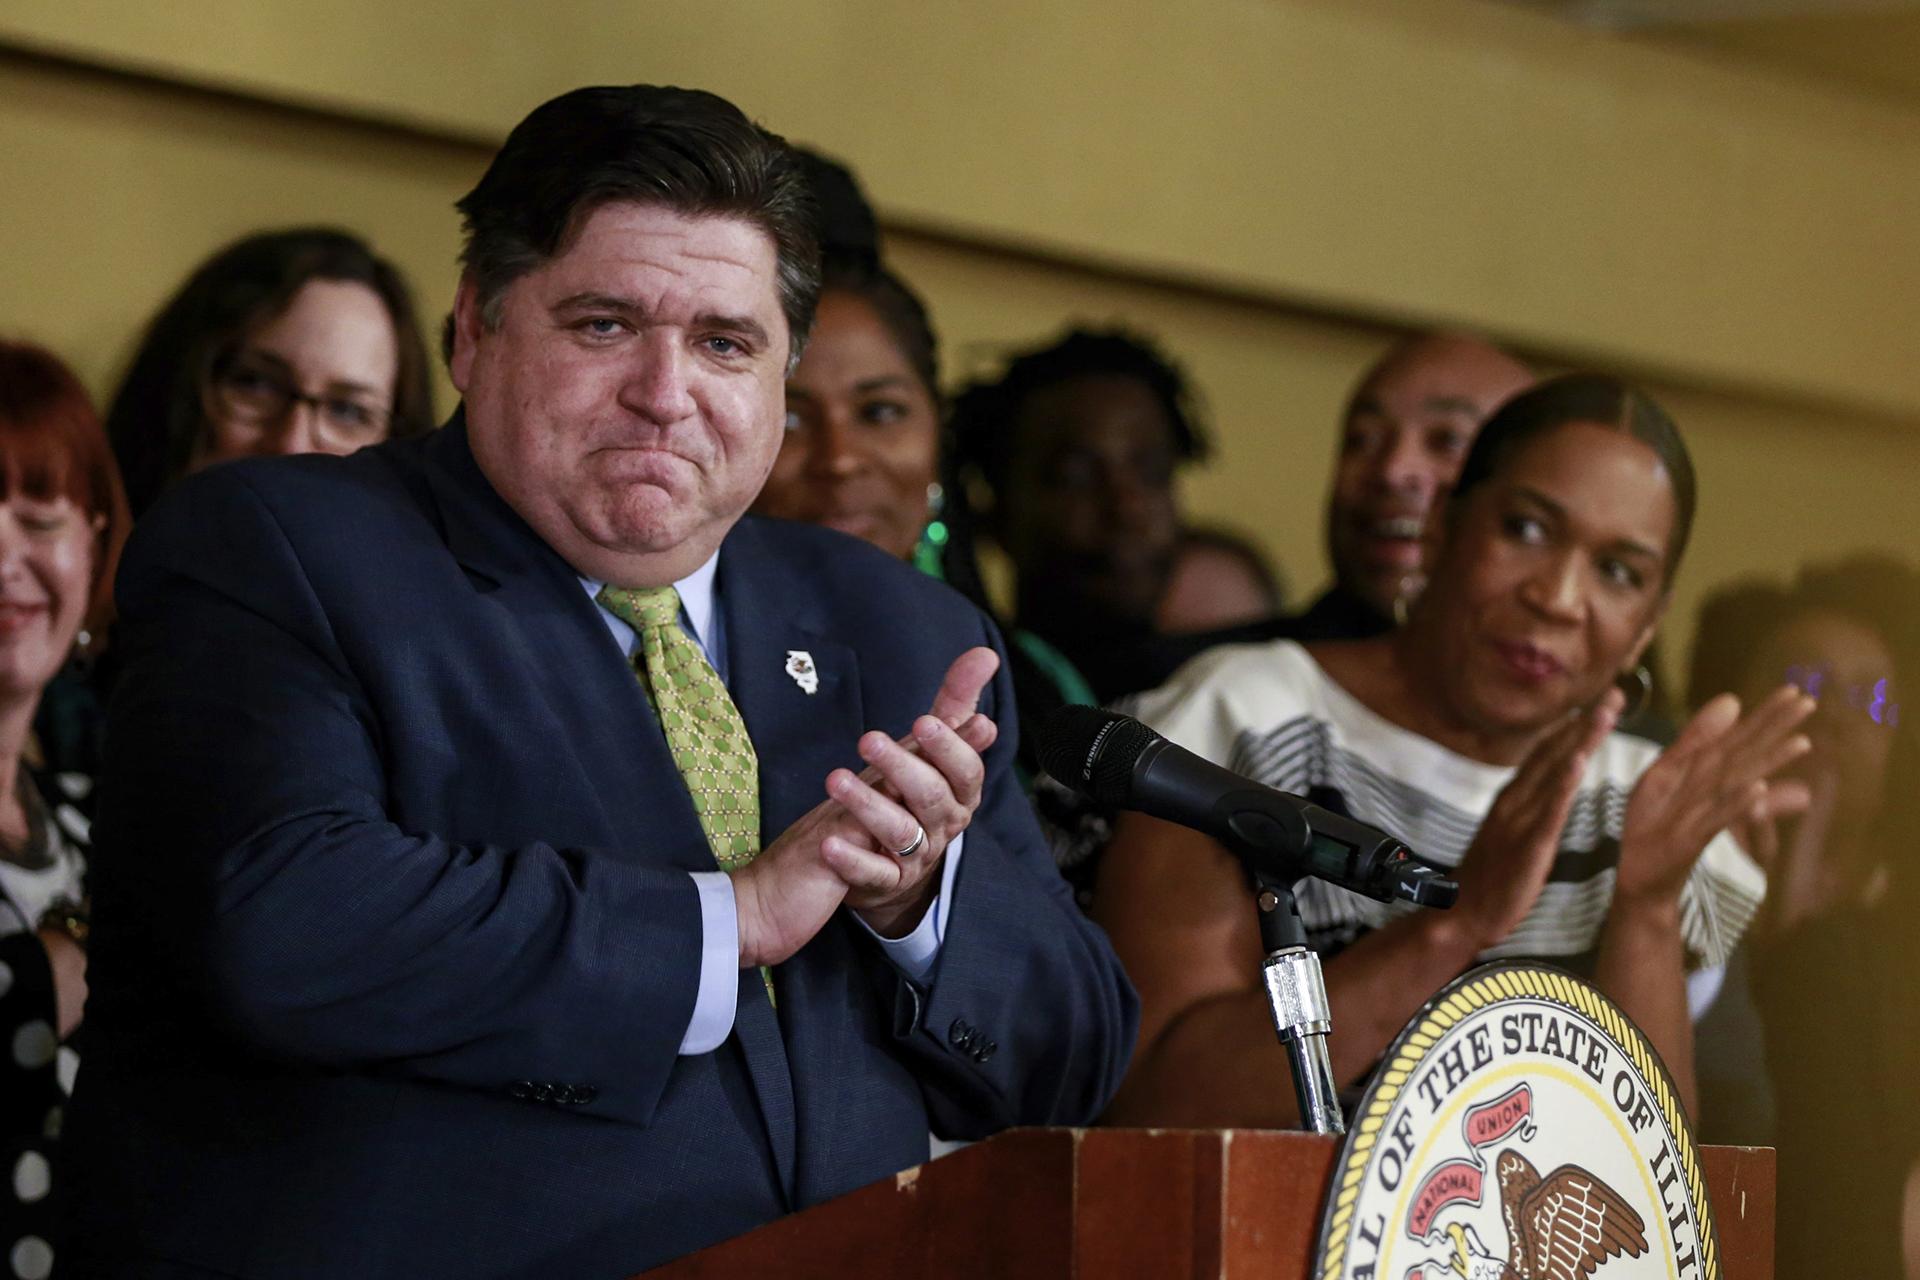 Gov. J.B. Pritzker takes in the applause before signing a bill that legalizes adult-use cannabis in the state of Illinois at Sankofa Cultural Arts and Business Center in Chicago. (AP Photo / Amr Alfiky)